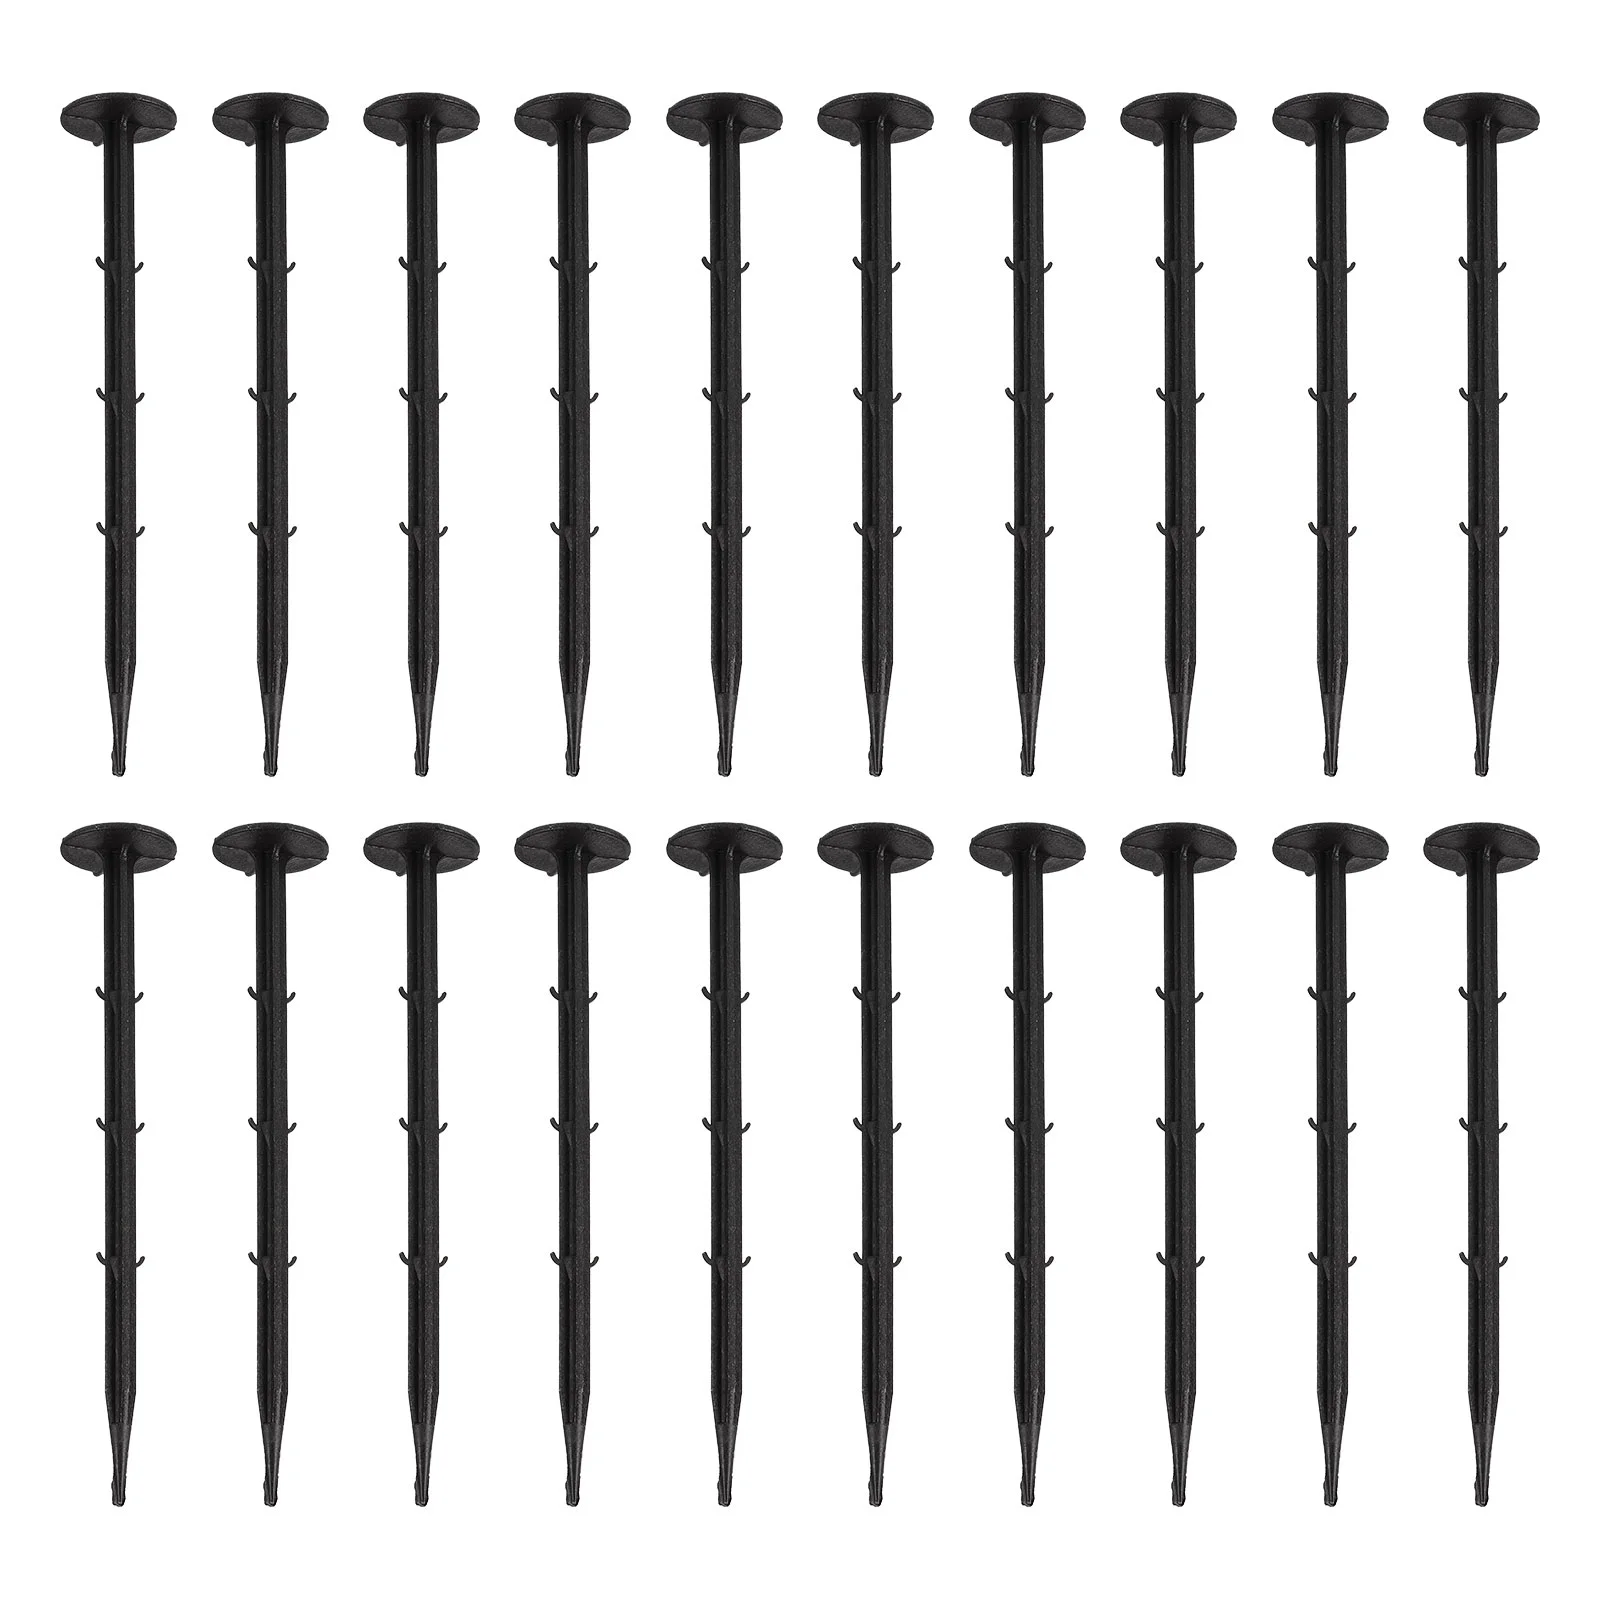 

Ground Stakes Nail Stake Garden Landscape Tent Gardening Spikes Plastic Pegs Nails Peg Camping Outdoor Fixing Anchors Lawn